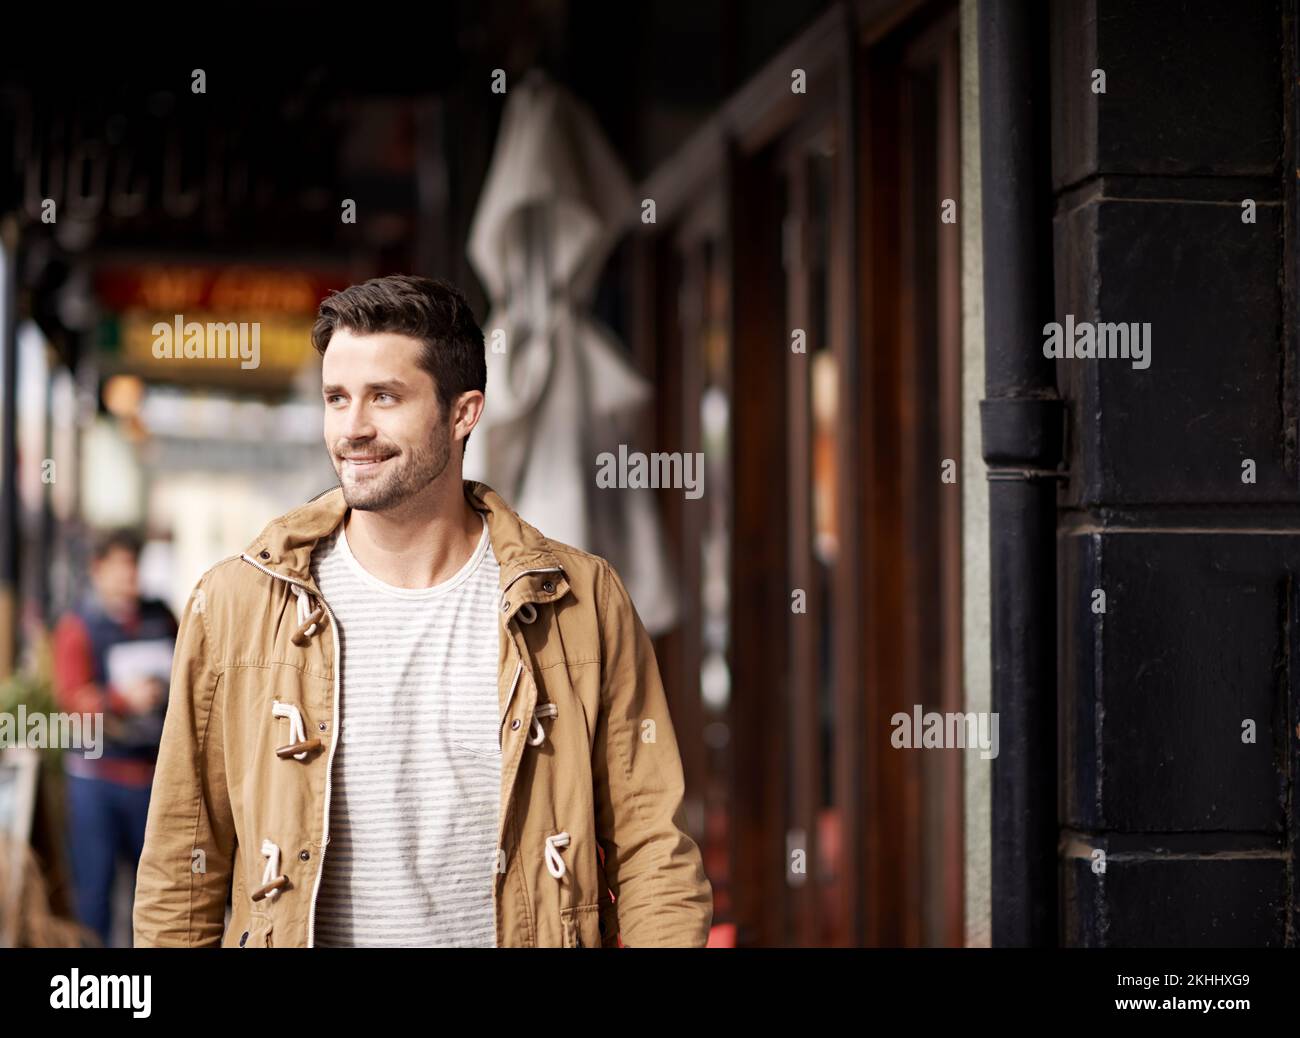 I love this city. A handsome young man enjoying the city scenes. Stock Photo